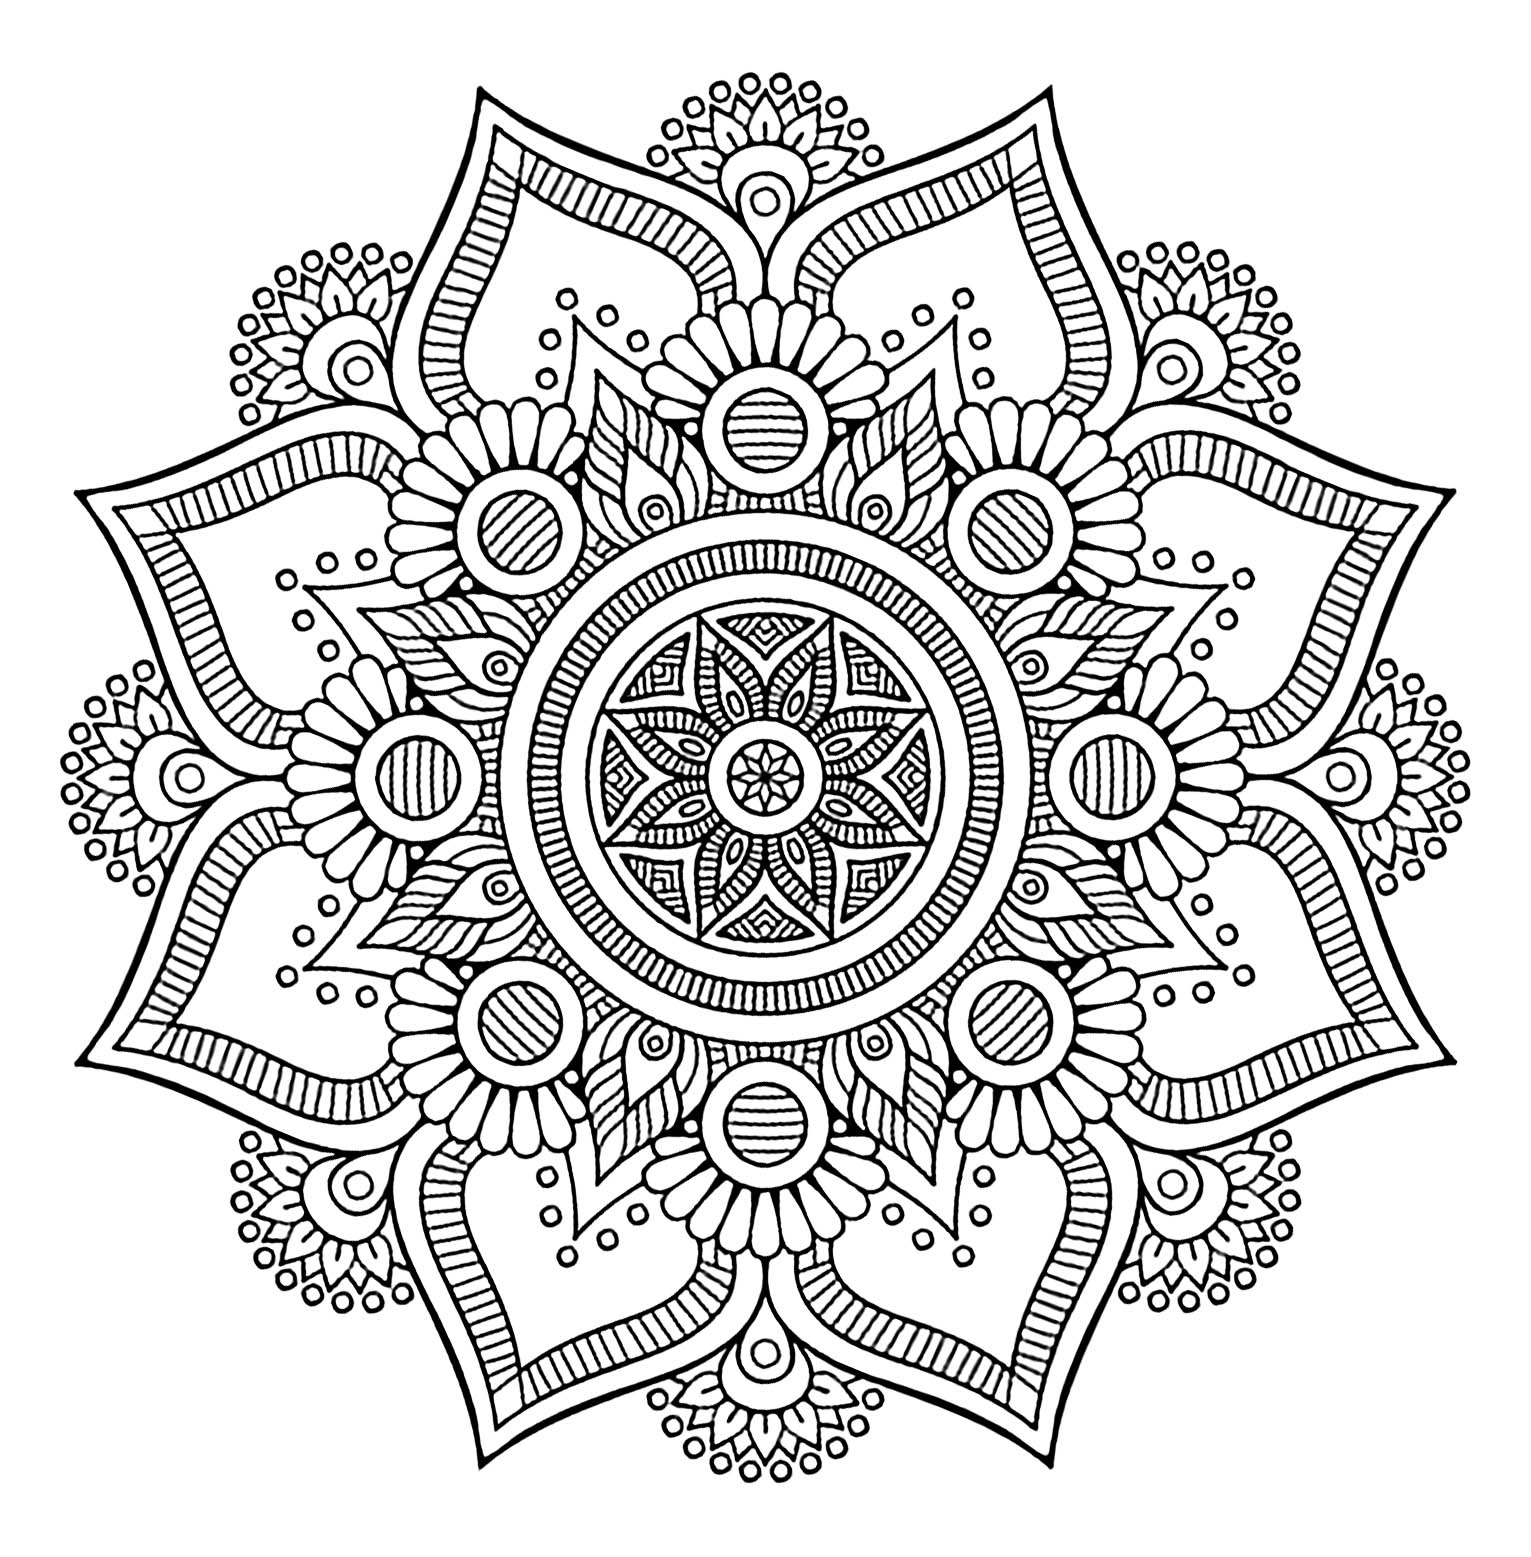 Download The big flower - Mandalas Adult Coloring Pages